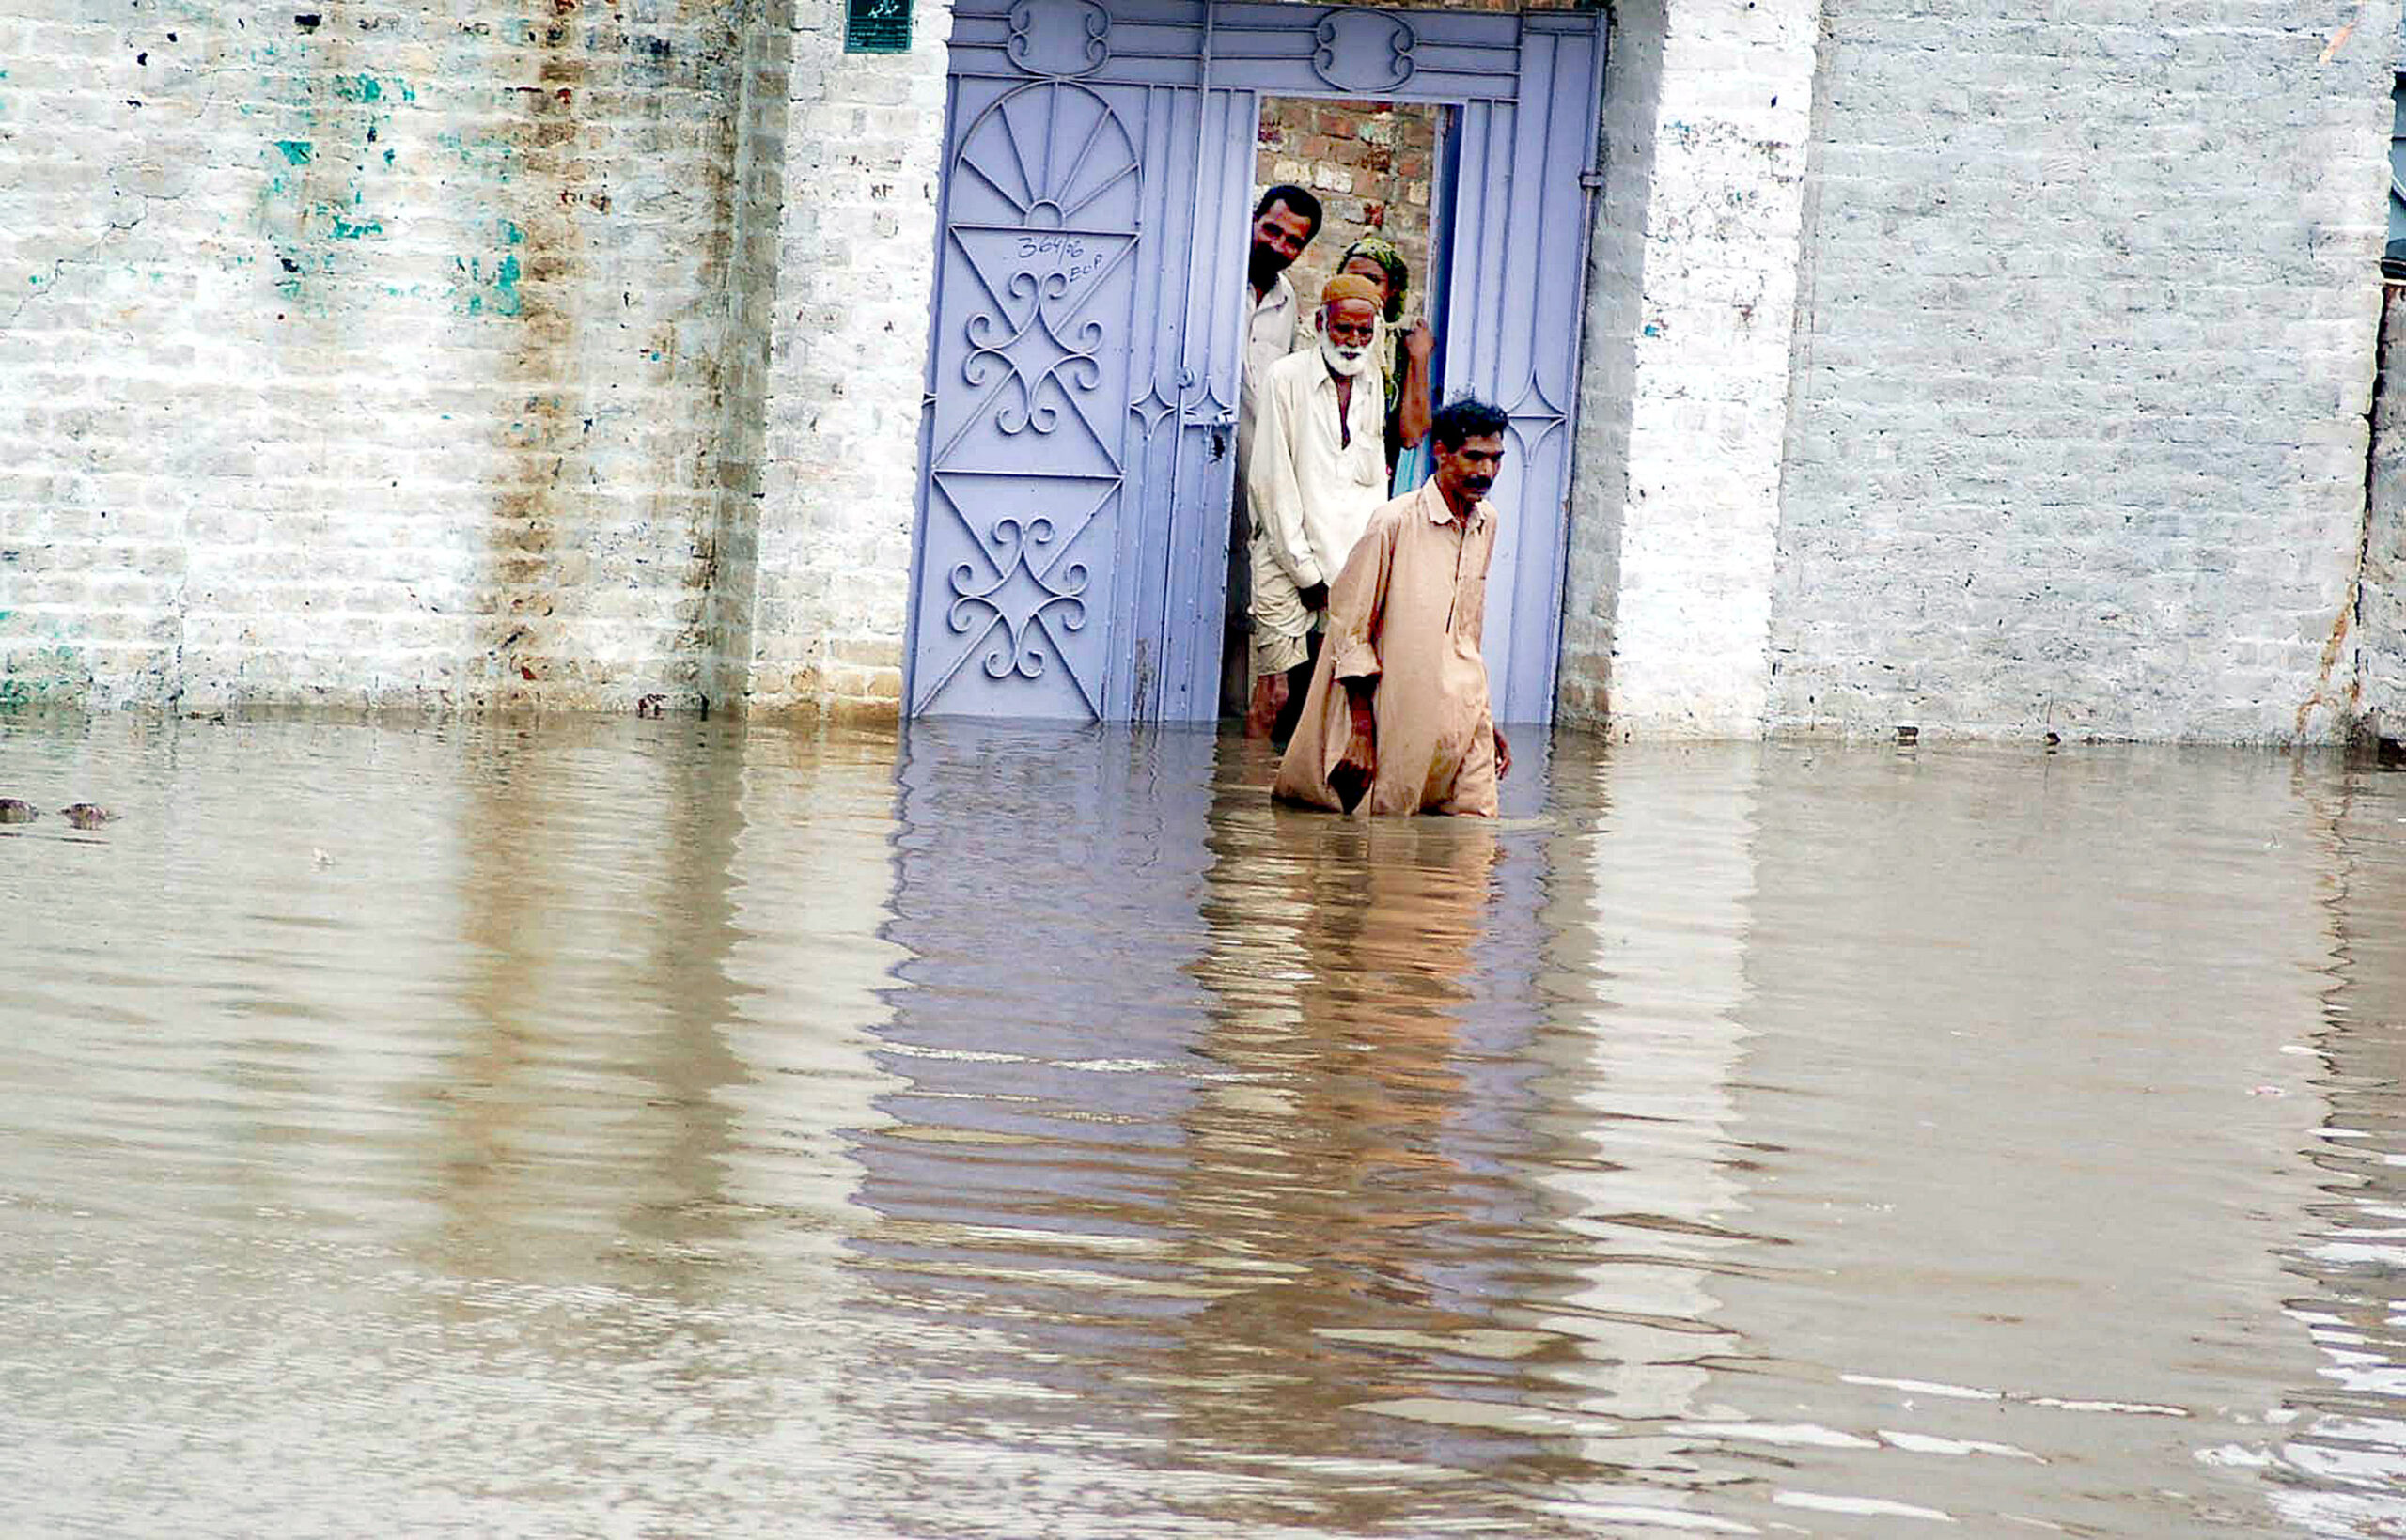 A man passes through a flooded street after heavy rains fall